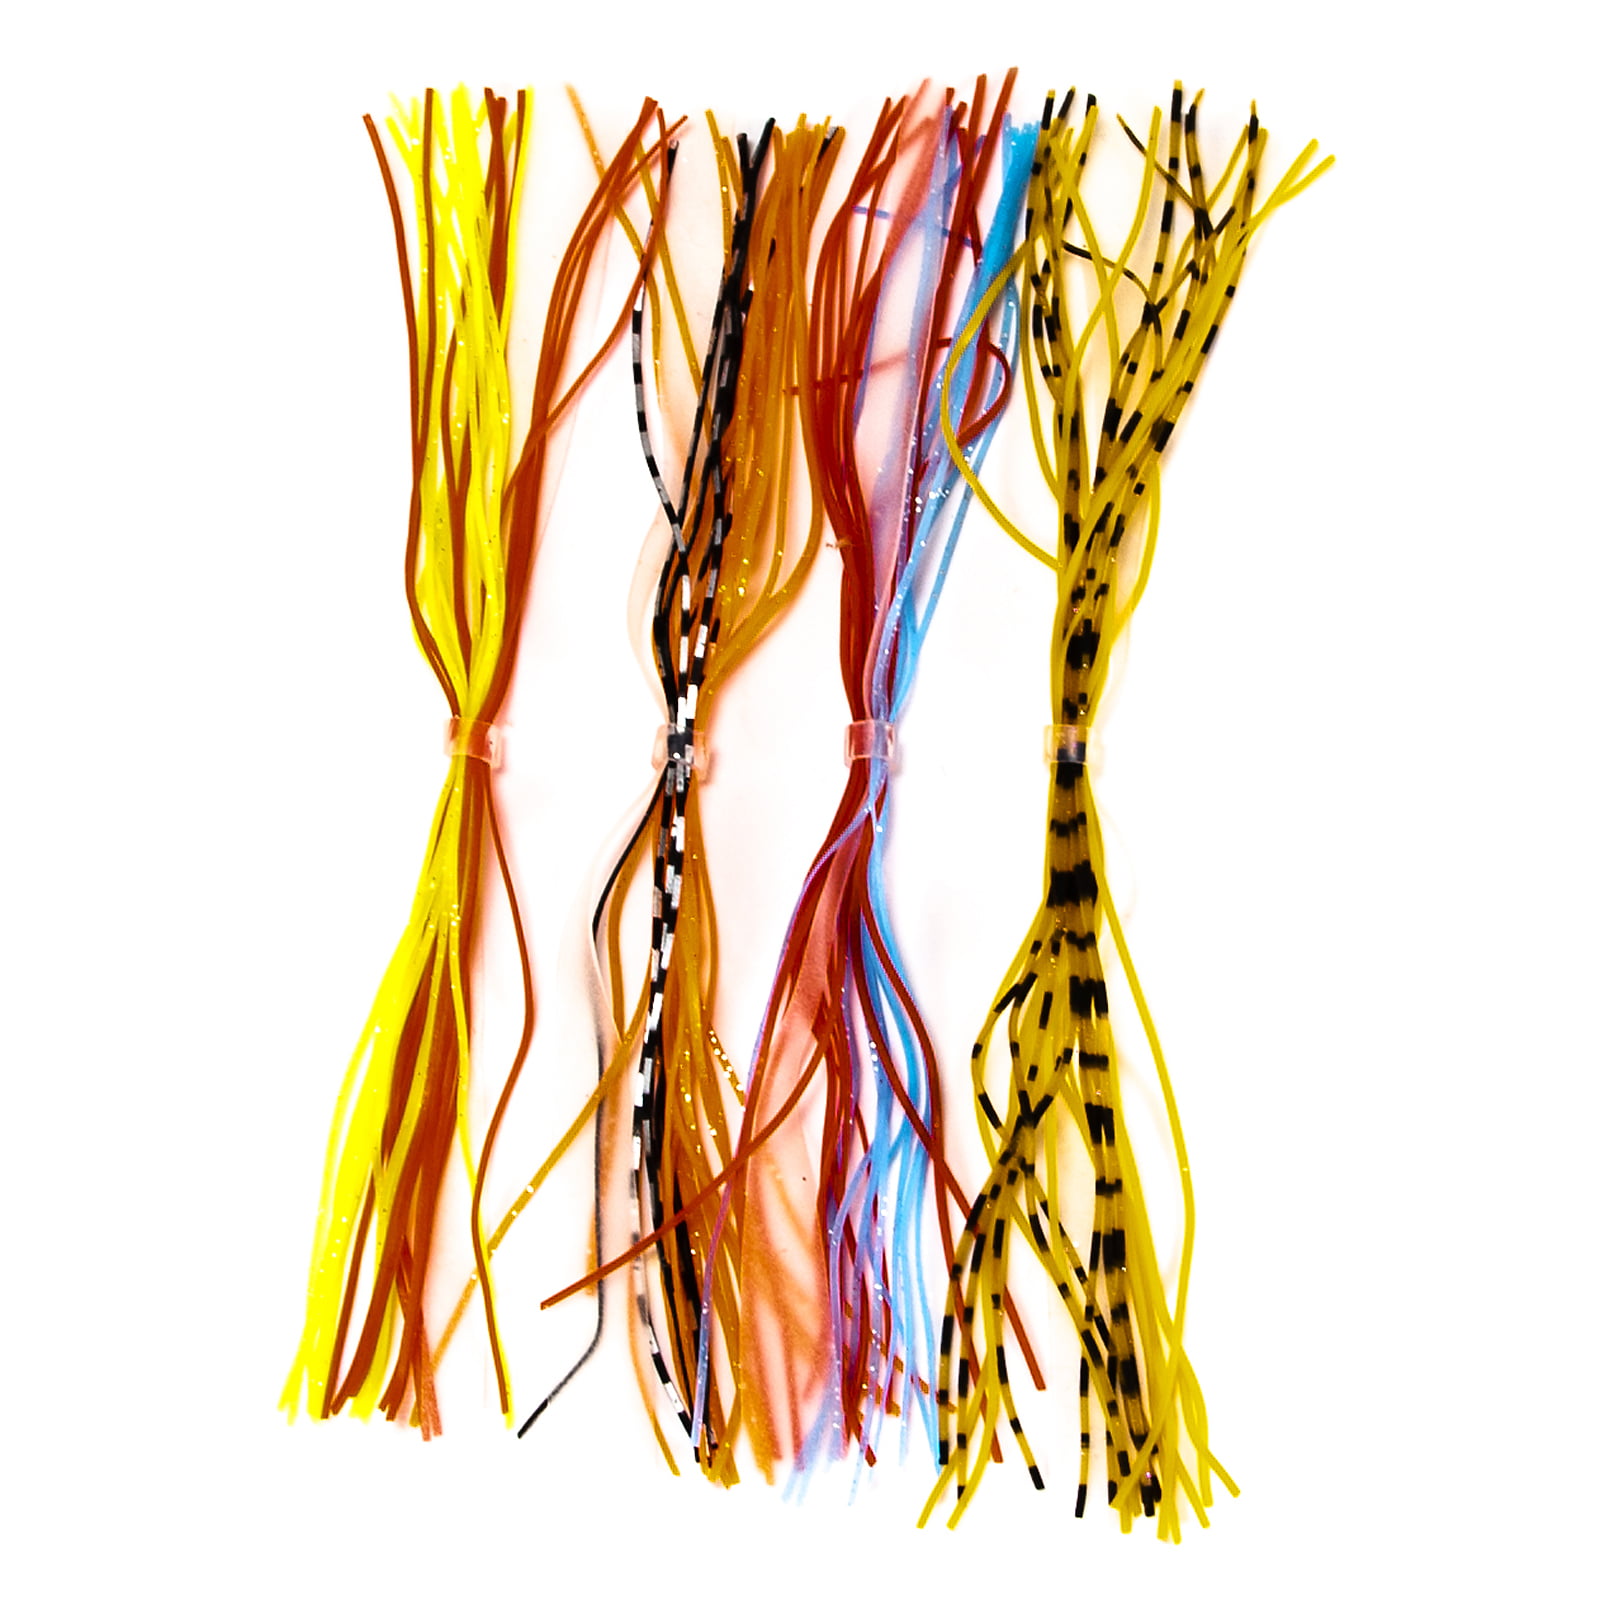 Details about   10 Bundles 50 Strands Fishing Silicone Skirt Spinnerbait Jig Replacement All Red 